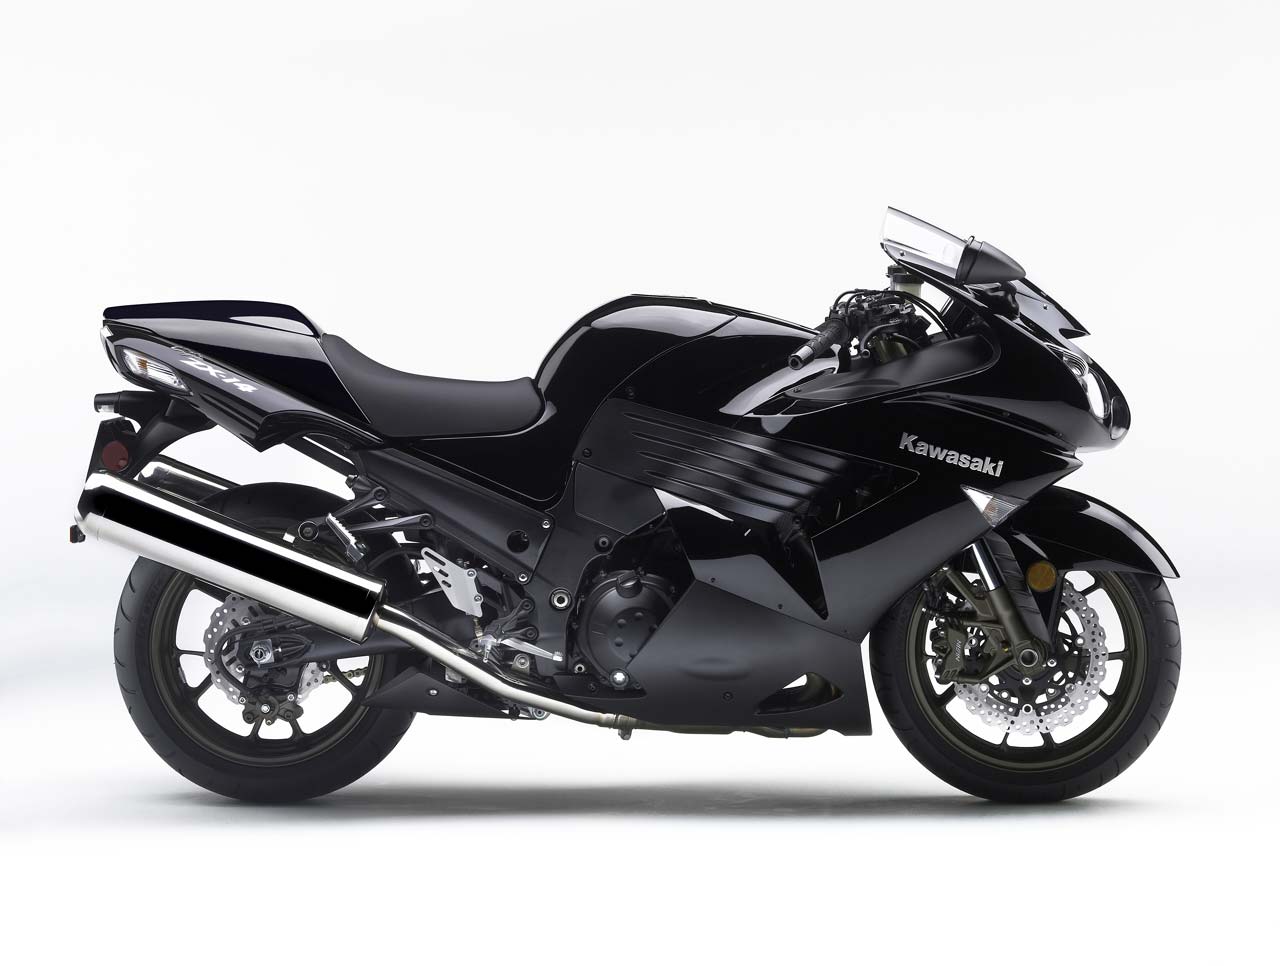 New Cars Galery In The Word And Hybrid Motorcycles Pictures